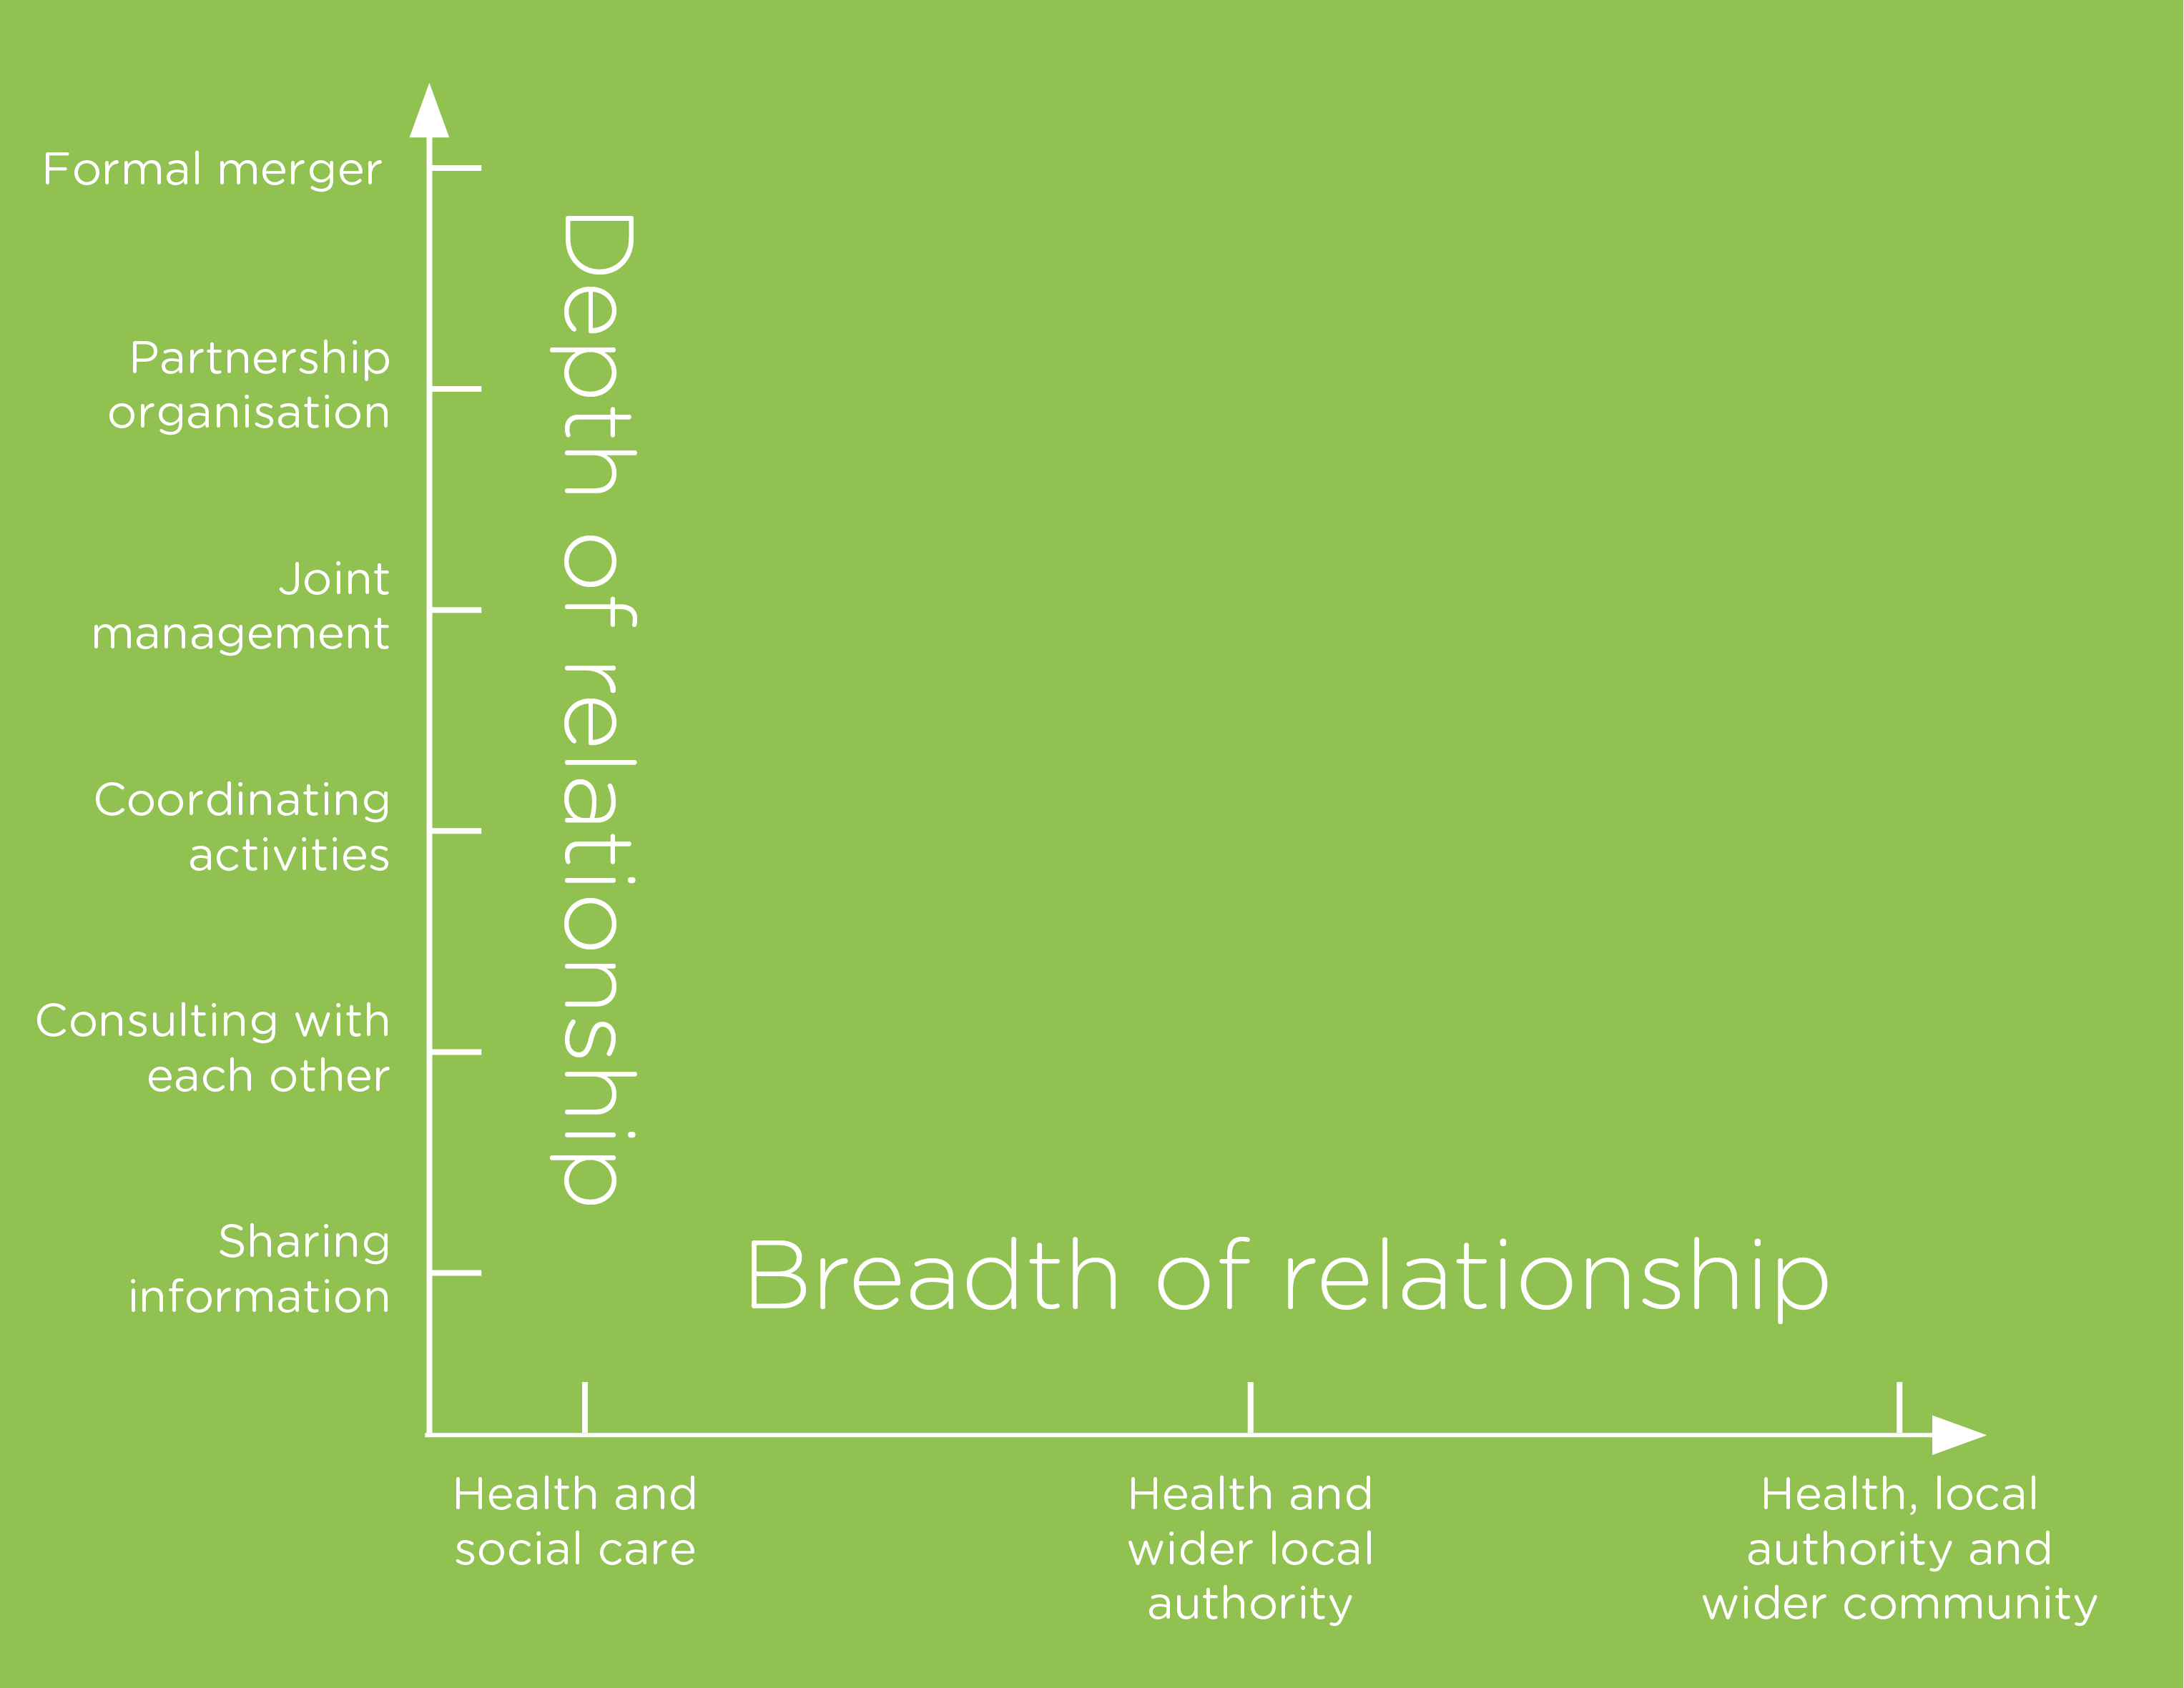 the idea of breadth versus depth to characterise the relationships